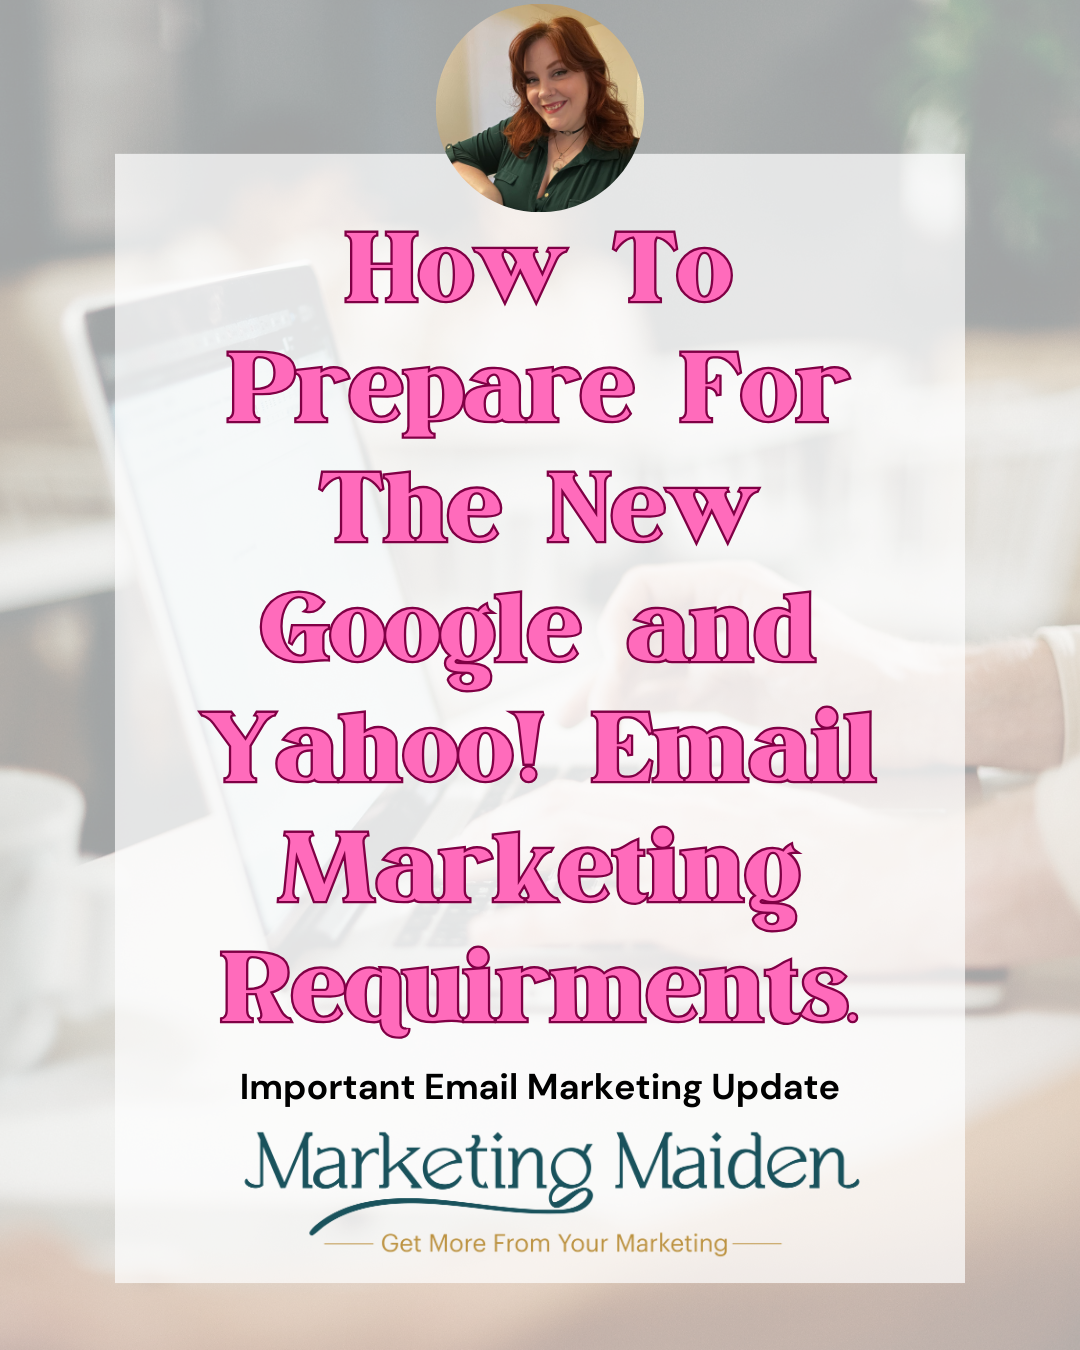 How to Prepare for the Google and Yahoo! Email Marketing Changes.